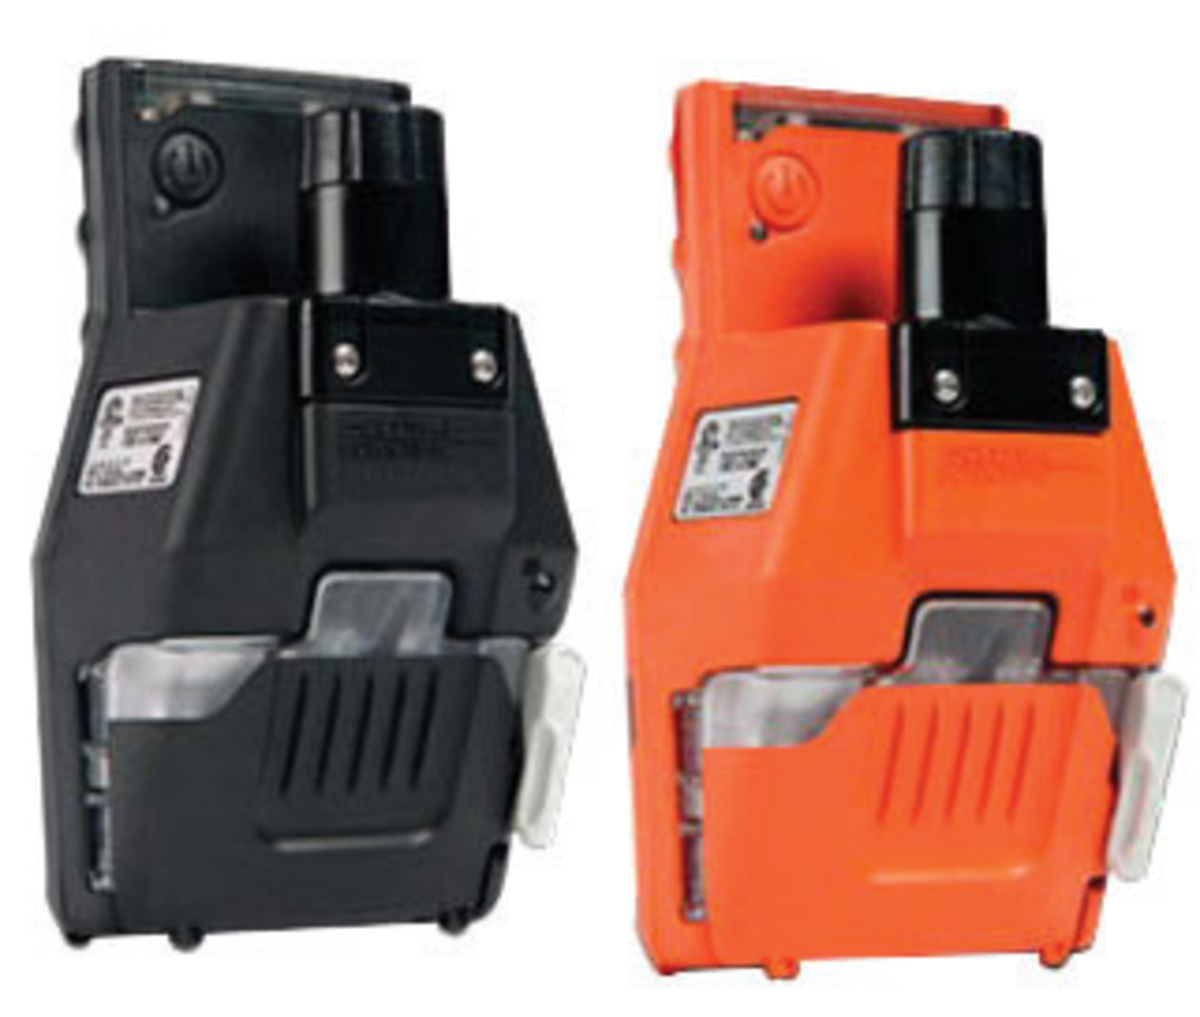 Industrial Scientific Black Slide-On Pump With Lithium-Ion Battery Pack For Ventis™ MX4 Multi-Gas Monitors